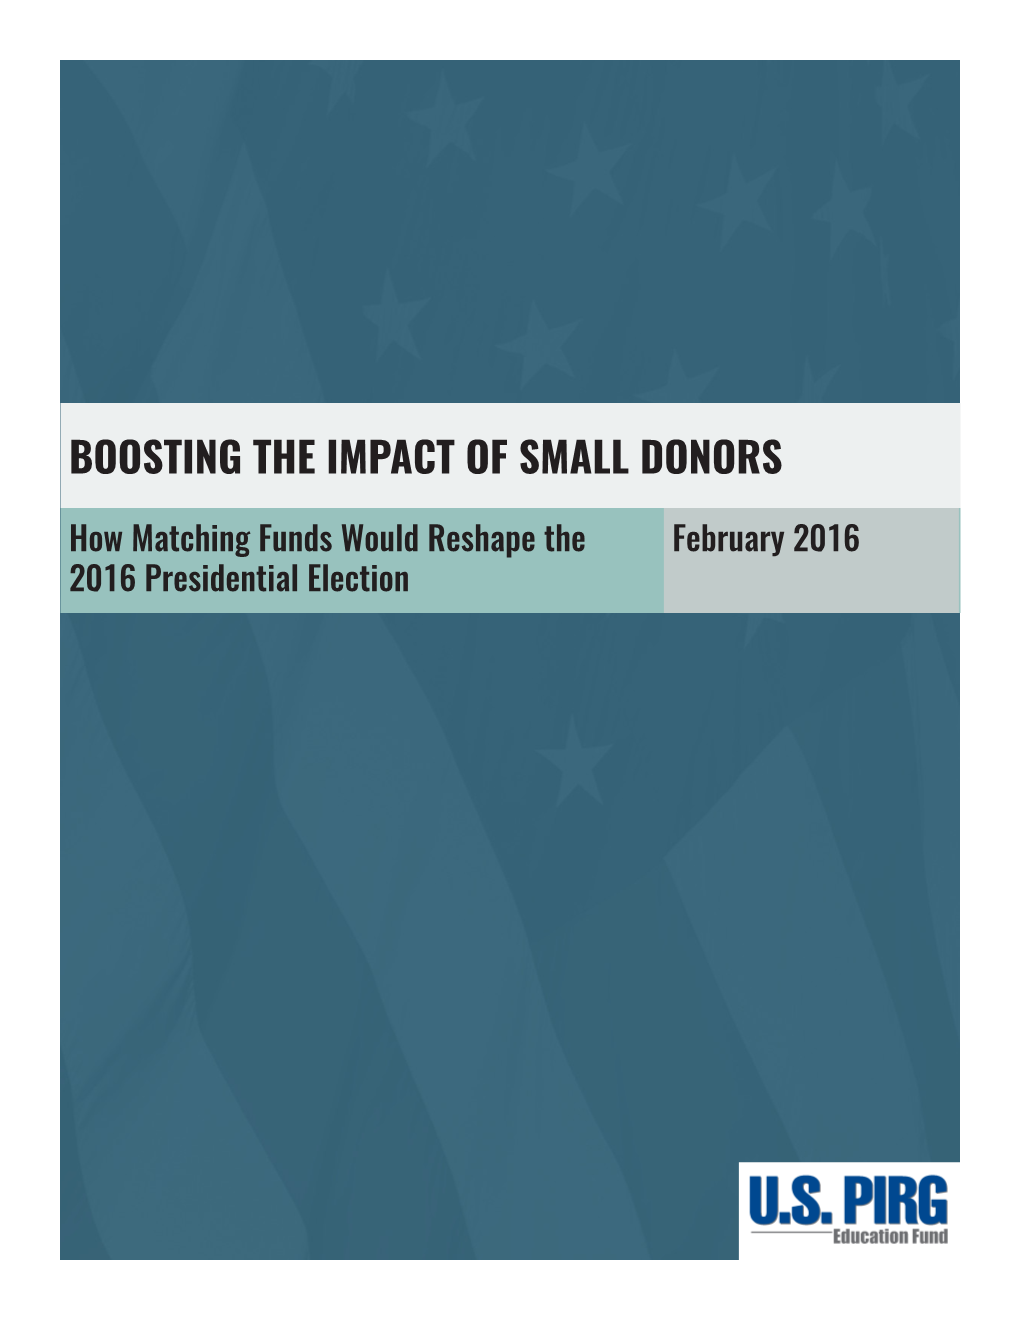 Boosting the Impact of Small Donors